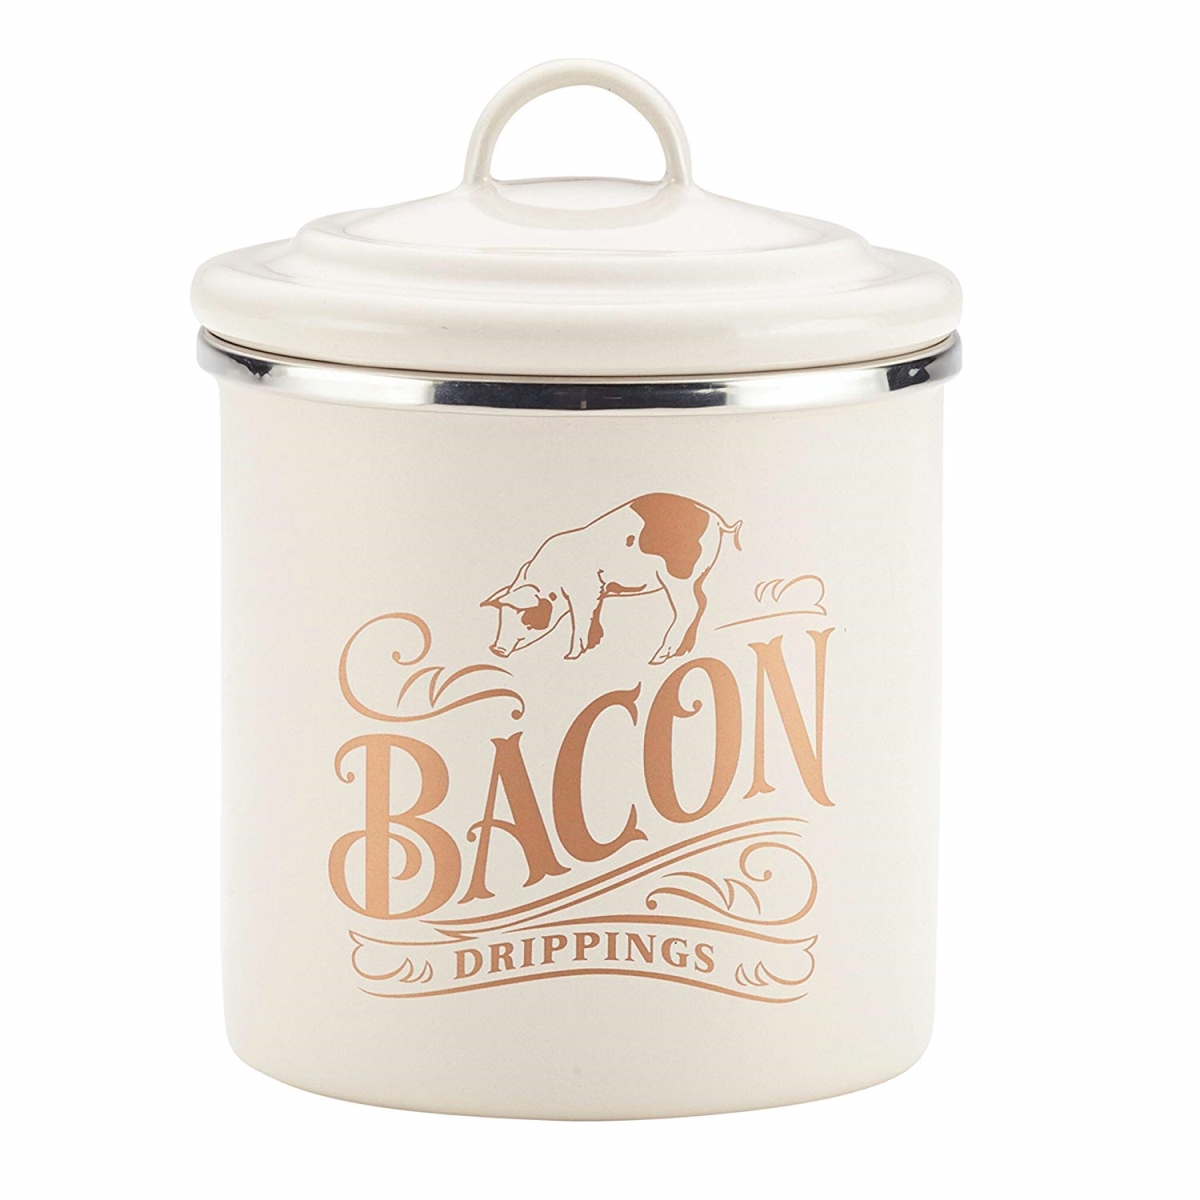 09074 Ayesha Collection Enamel On Steel Bacon Grease Cans, French Vanilla - Set Of 2